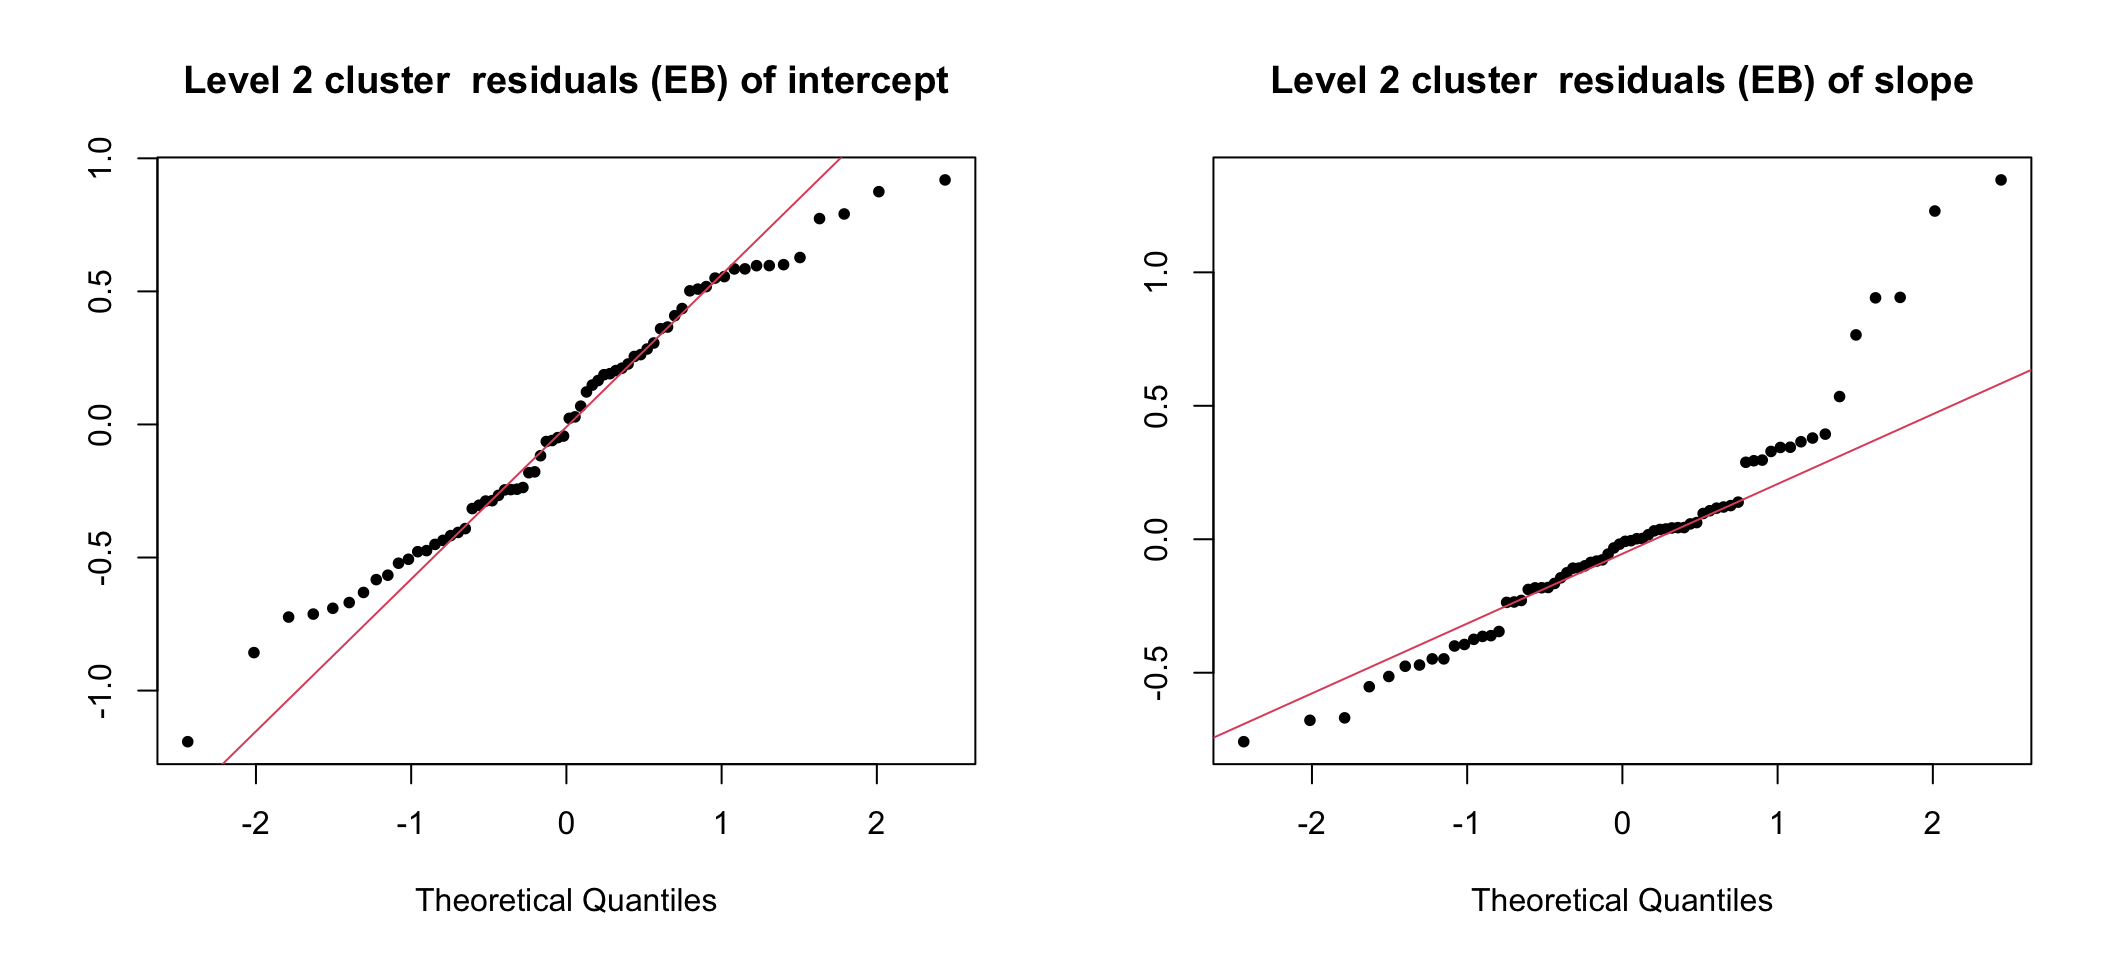 UN-Standardized cluster level residuals (intercept and slope) from the random intercept and slope model